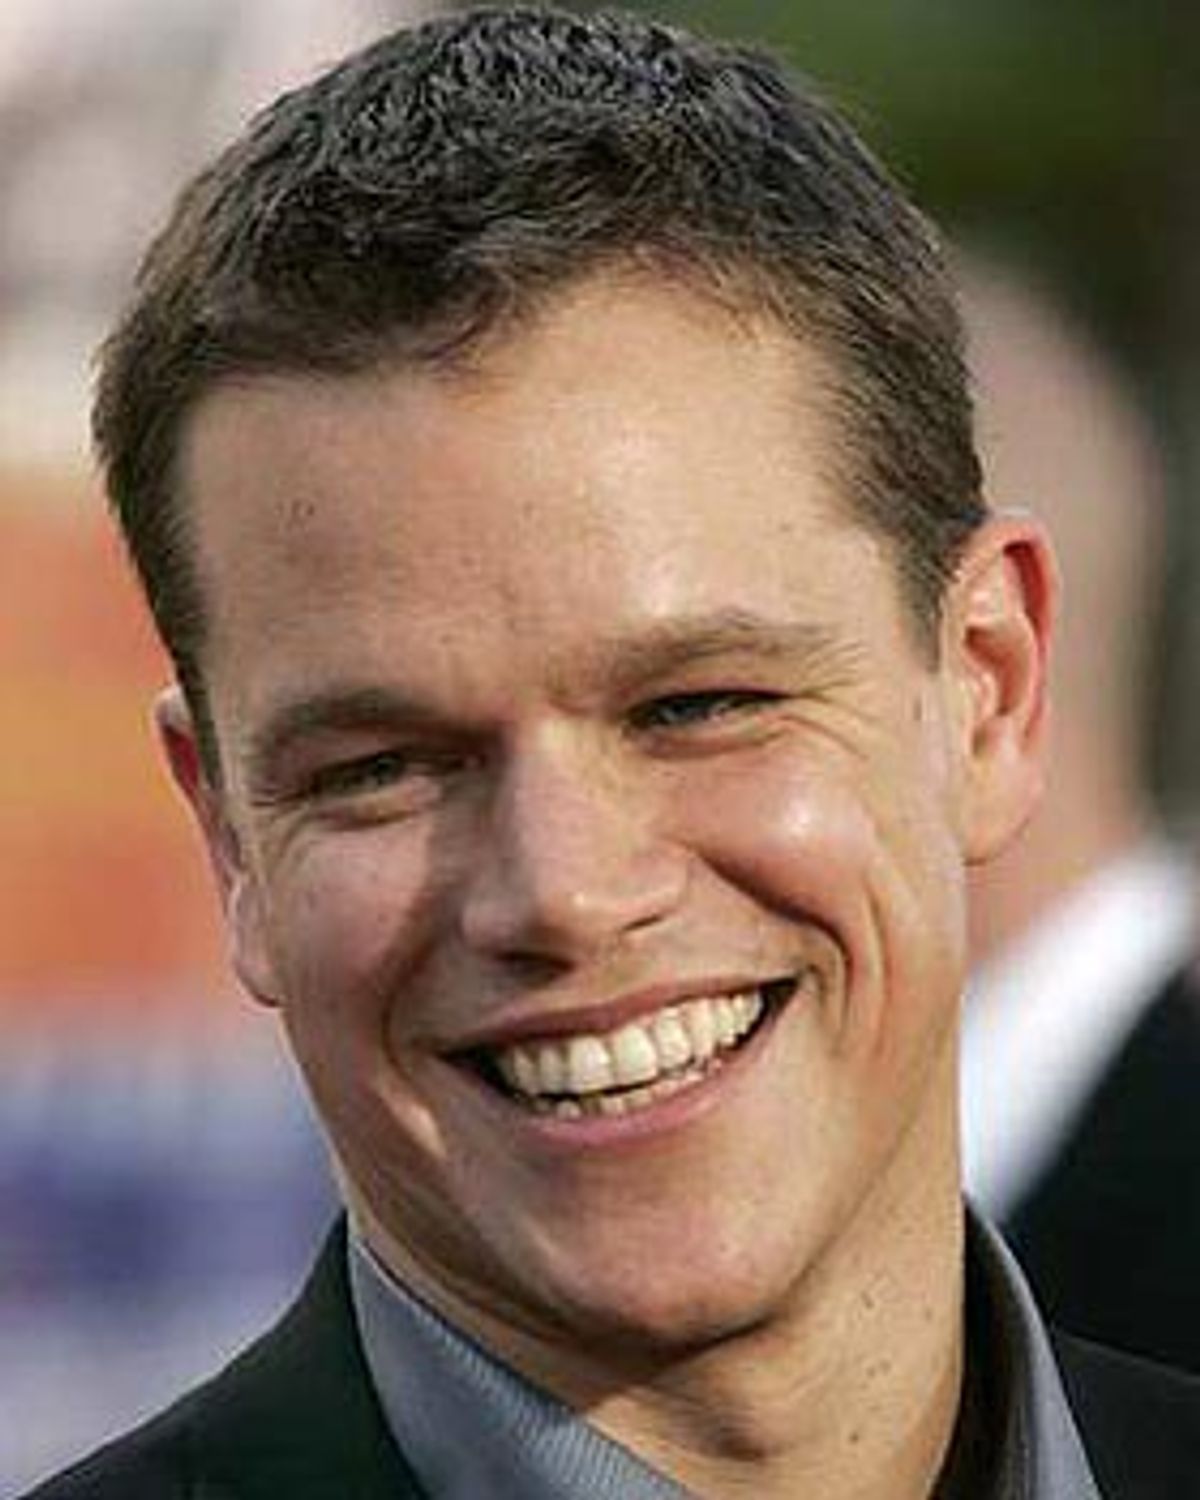 How You Know You've Stalked Matt Damon